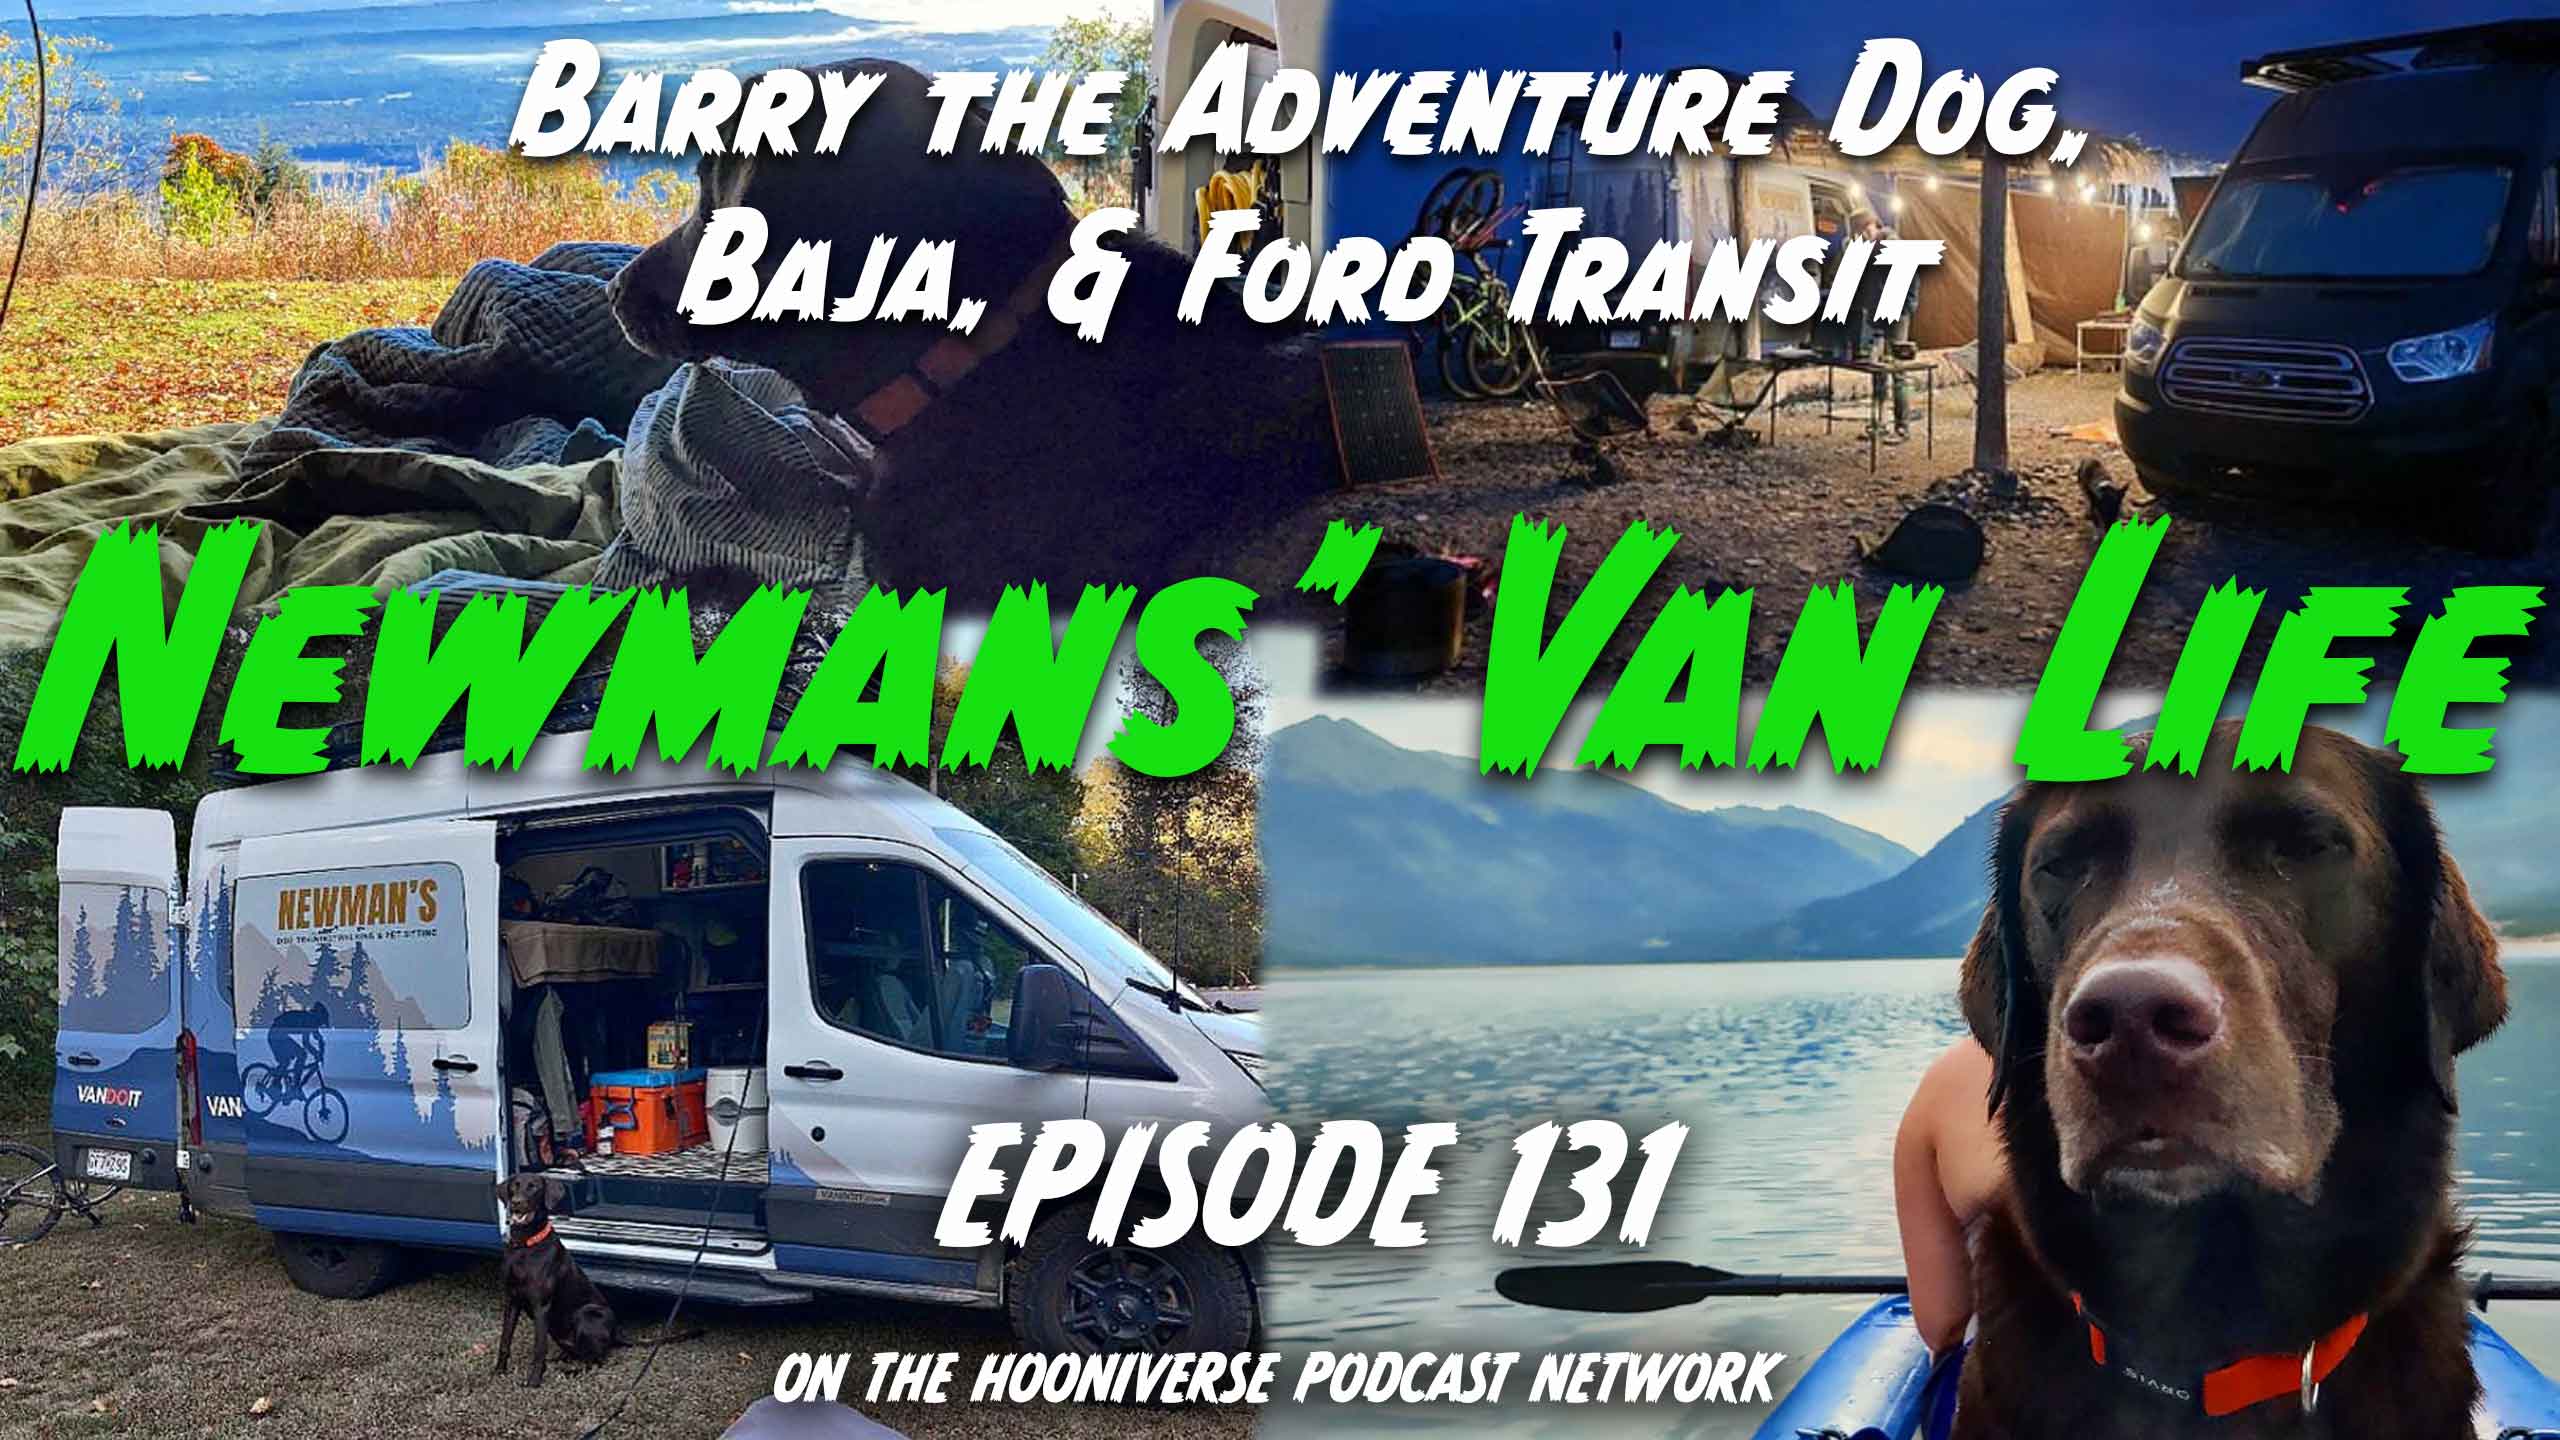 Newmans-dog-training-off-the-road-again-podcast-episode-131